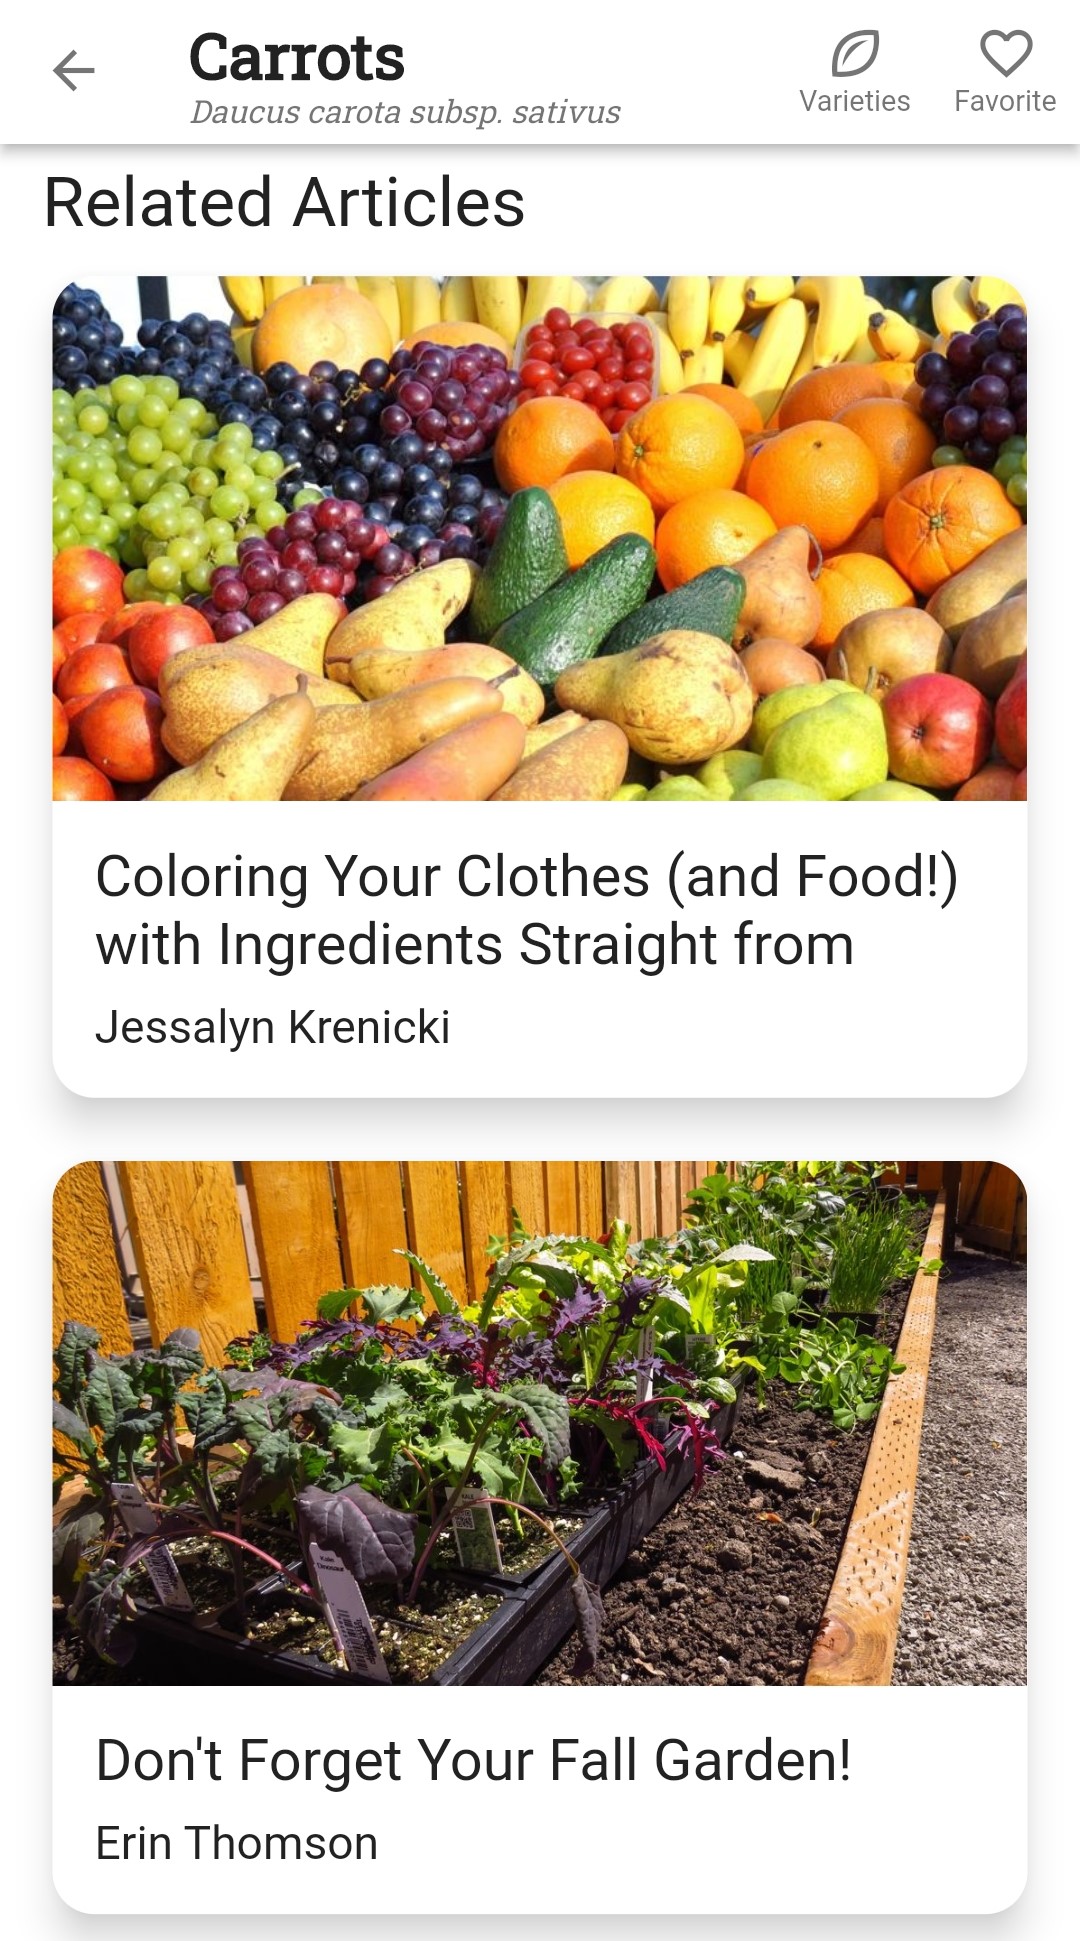 Screenshot Growing Guide articles related to carrots